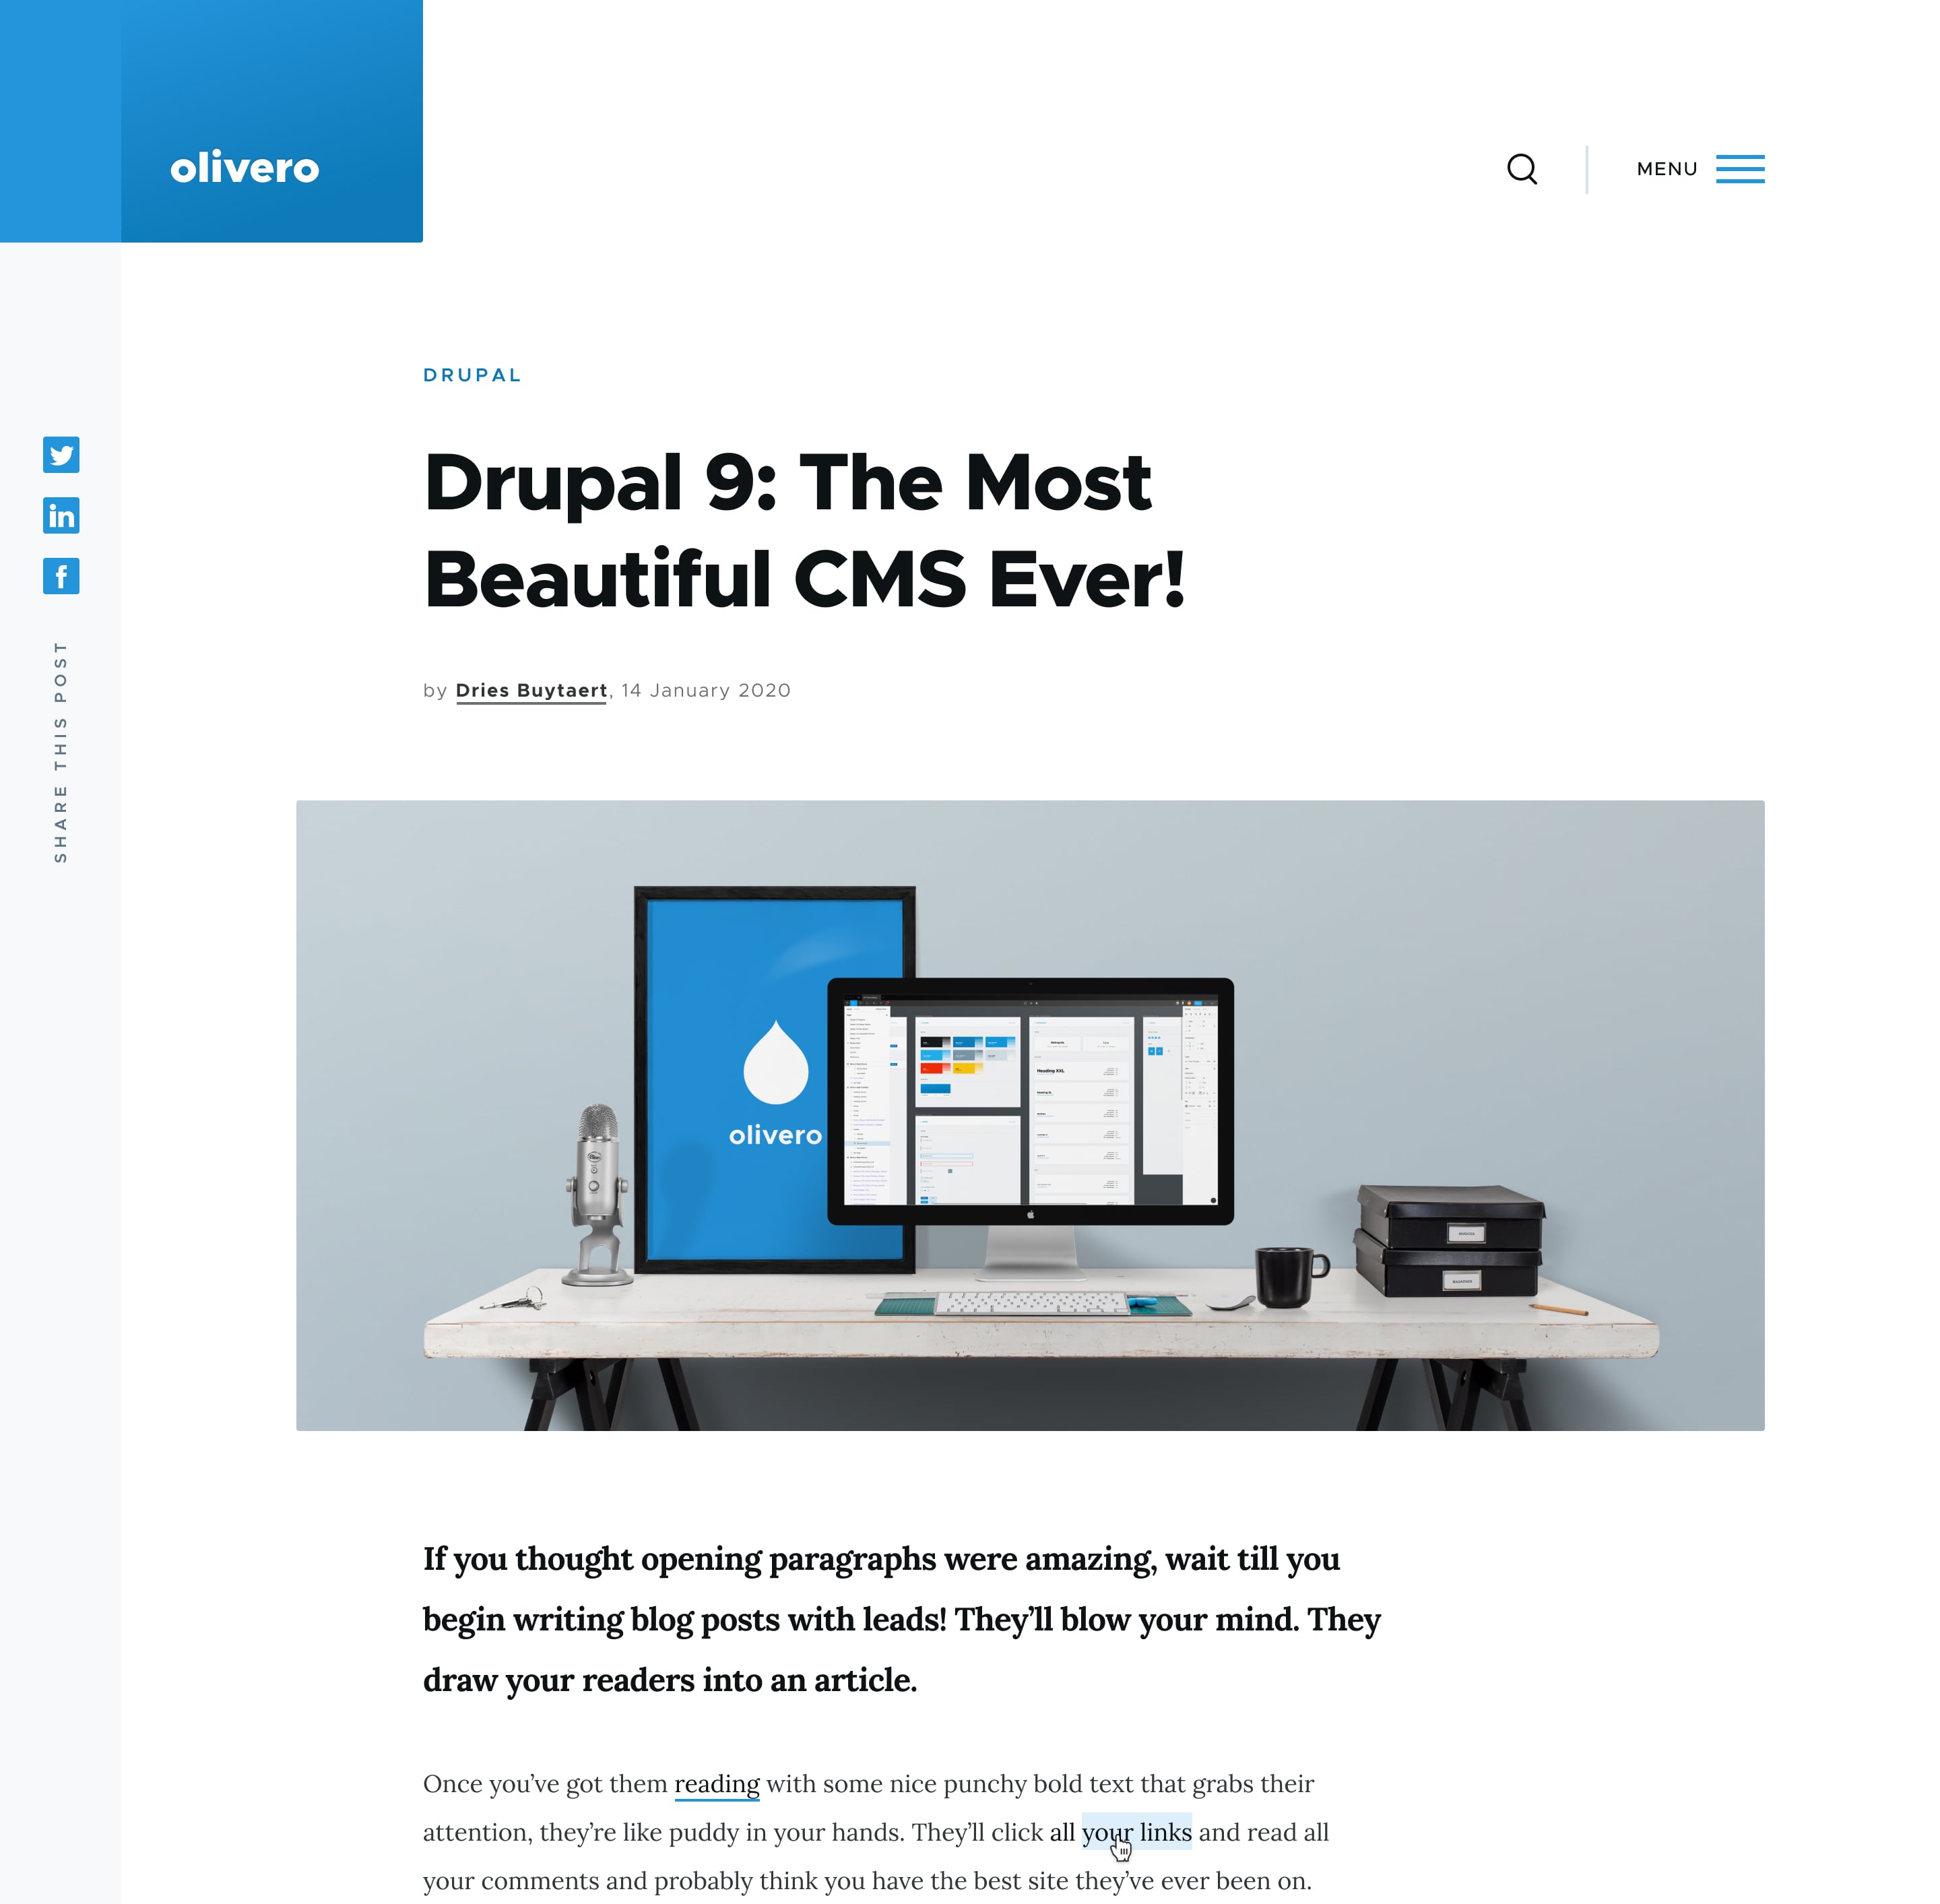 What's New in Drupal 9? Olivero, A New Default Theme